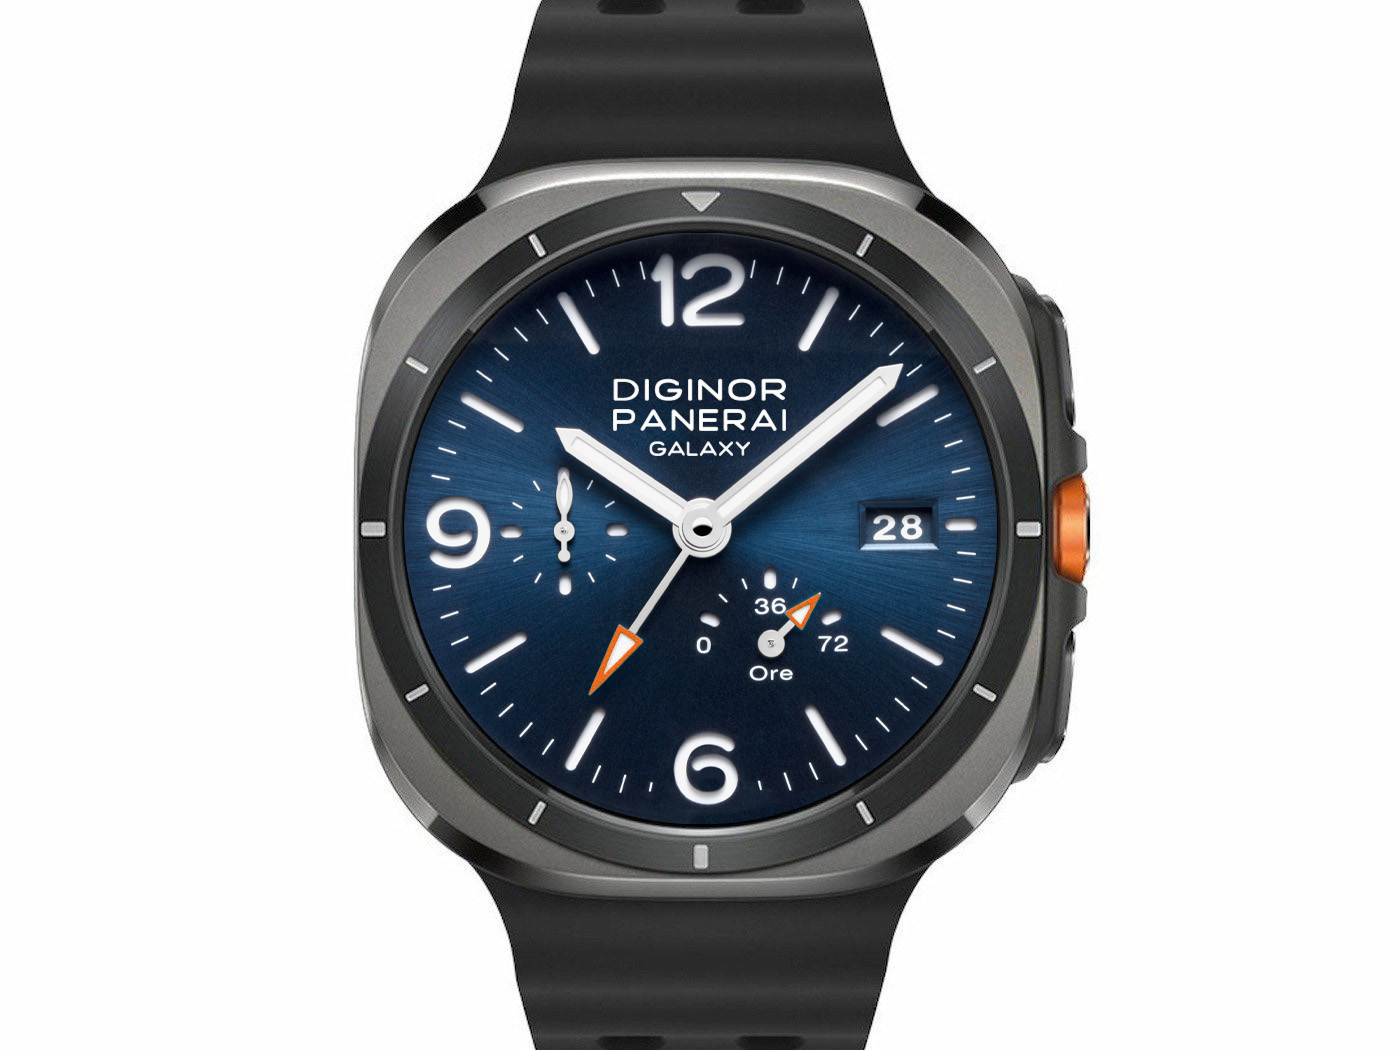 New-images-of-the-Samsung-Galaxy-Watch-Ultra-have-been.jpg